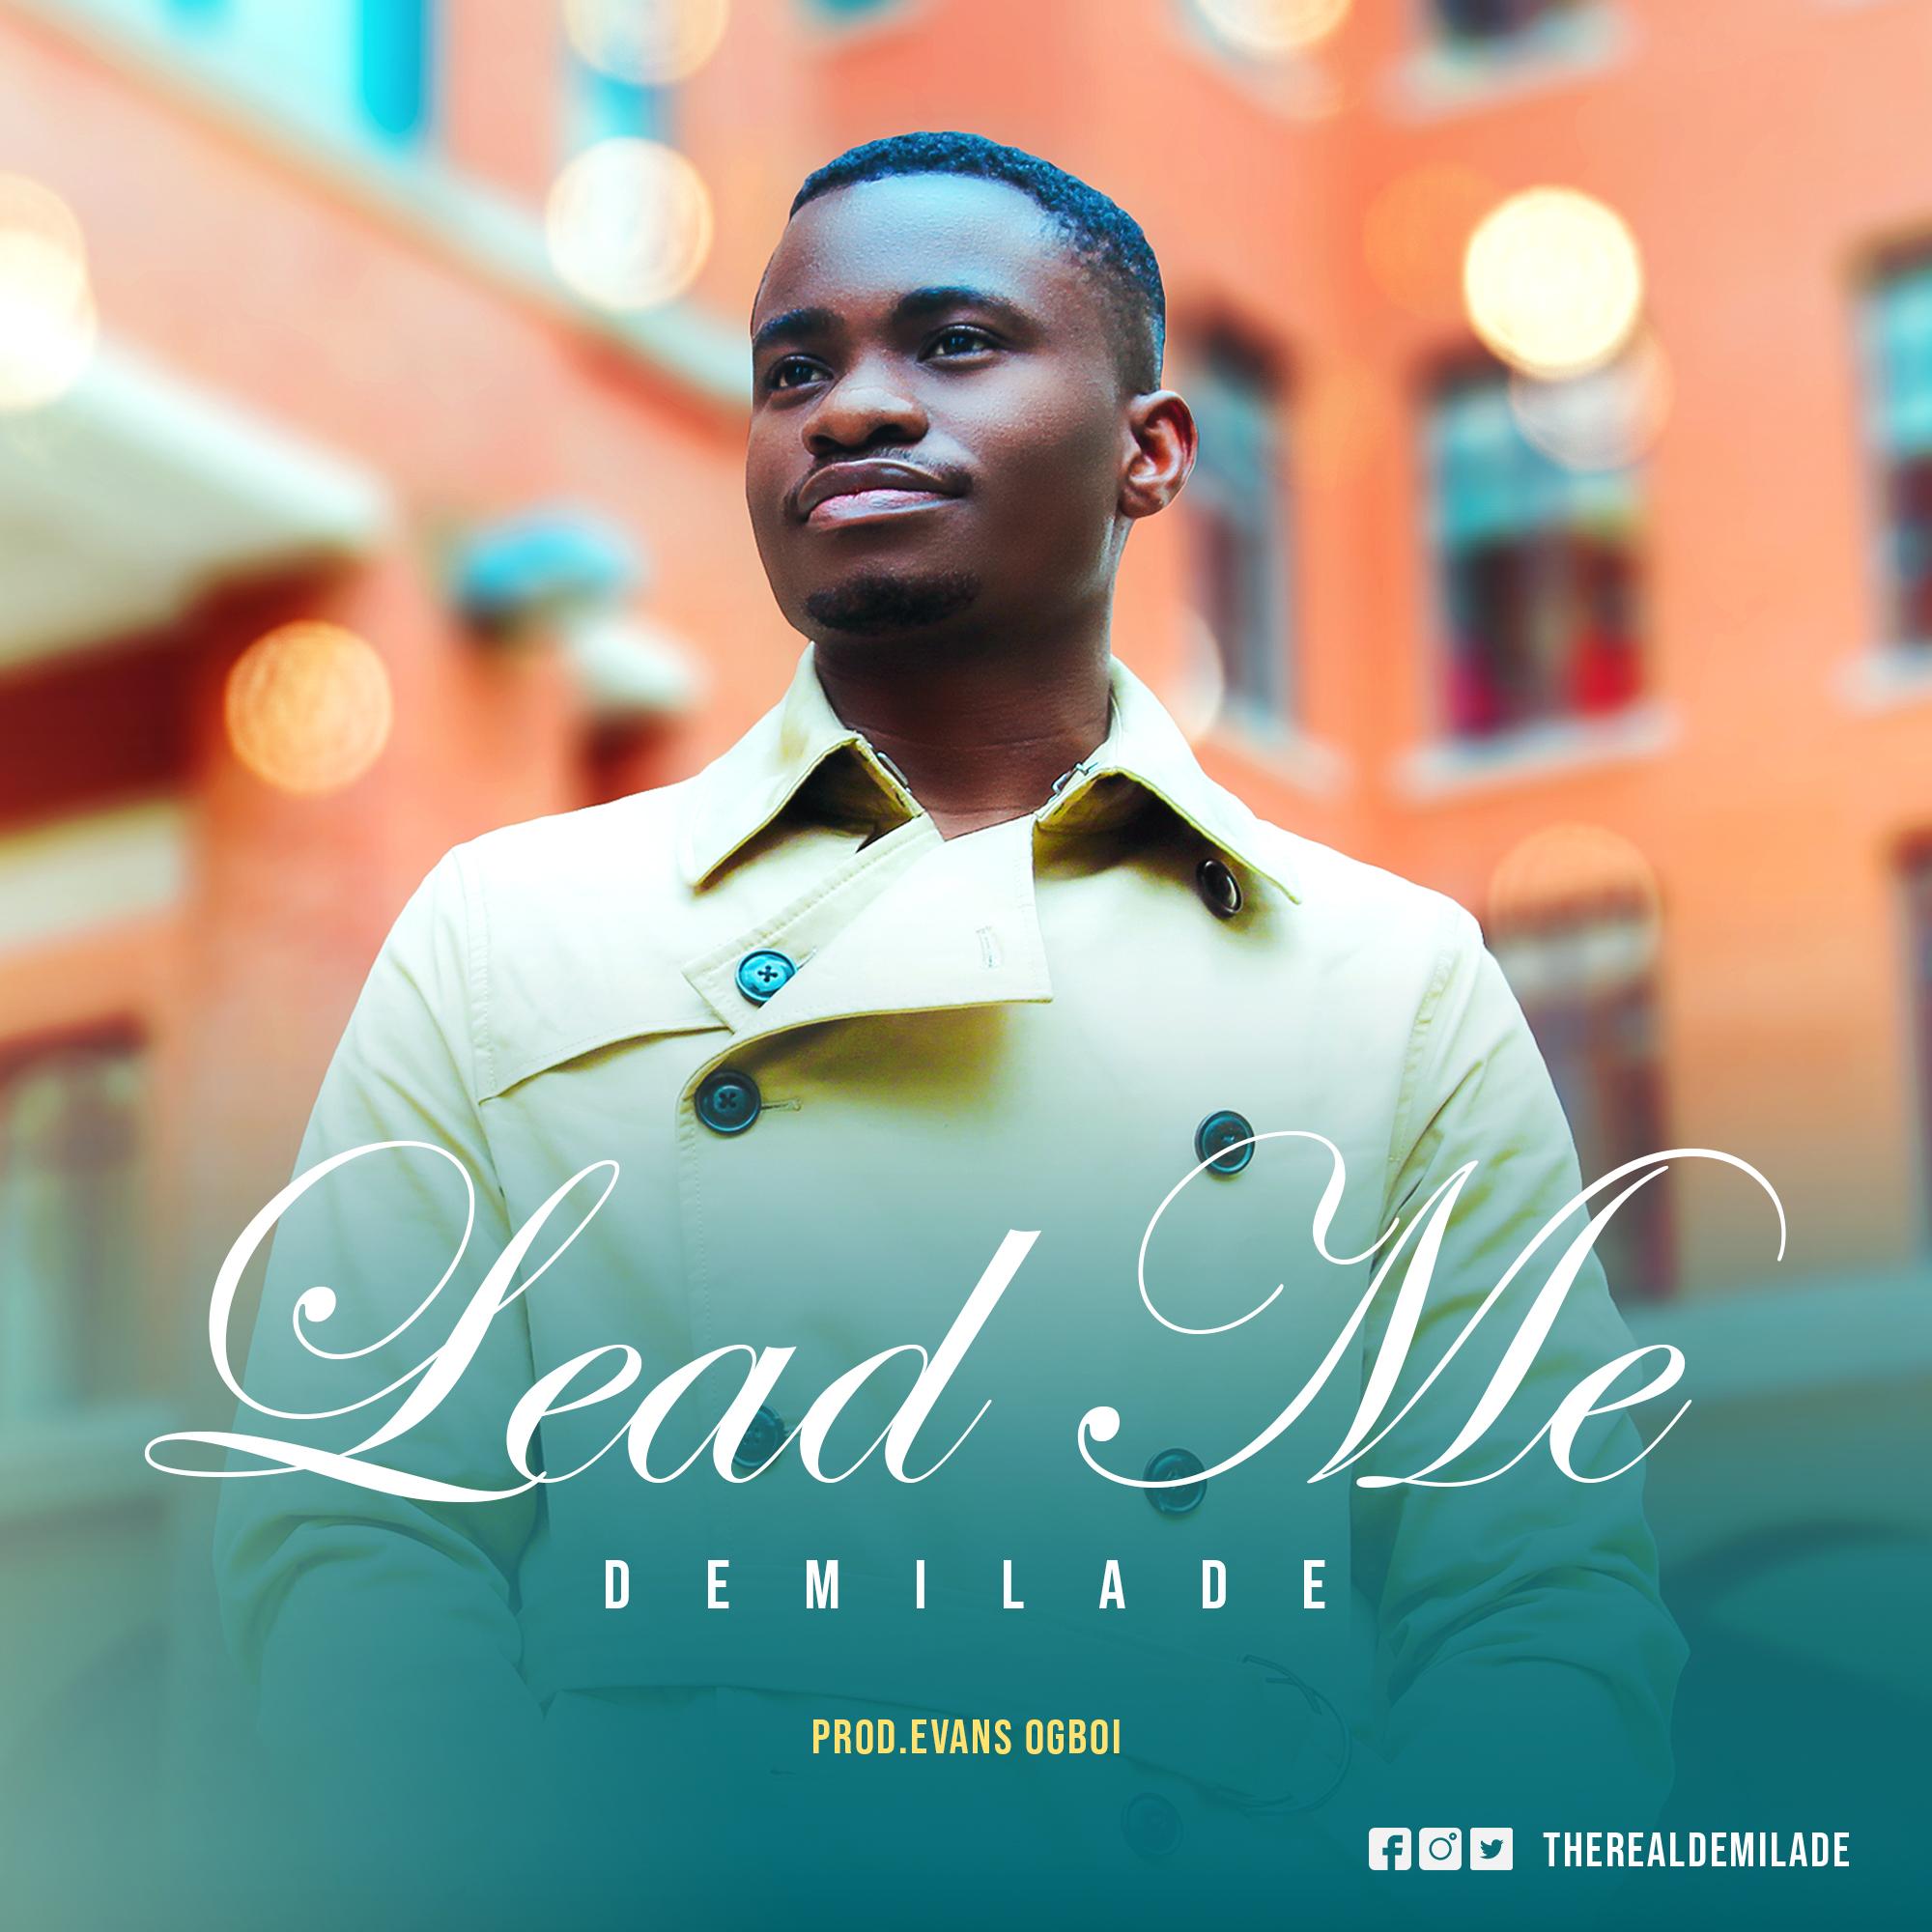 Demilade - "Lead Me" | @therealdemilade |